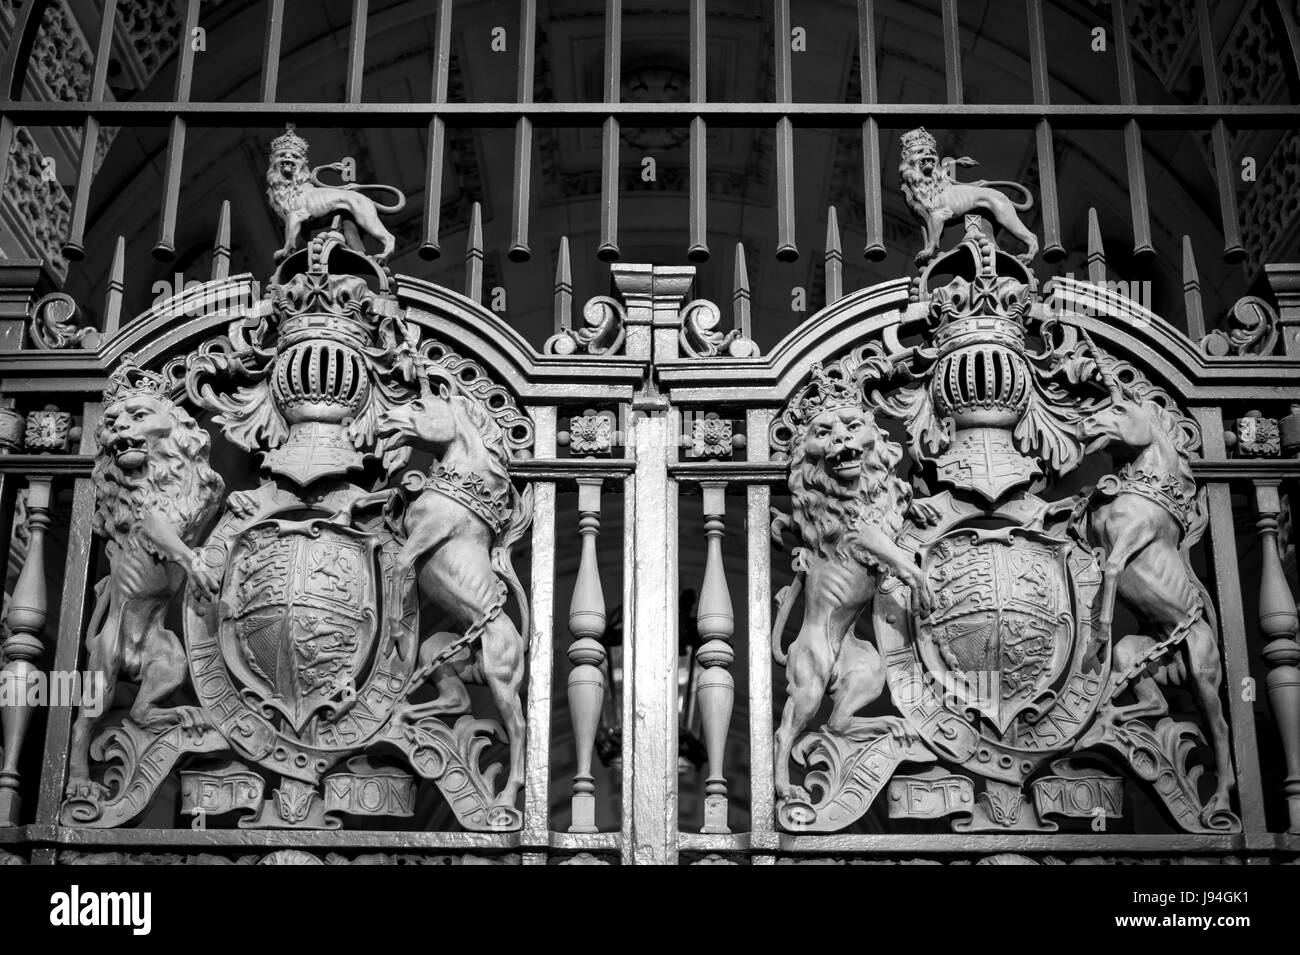 Close-up of the royal coat of arms of the United Kingdom on a closed gated entrance to an official building in Whitehall, in London, England Stock Photo